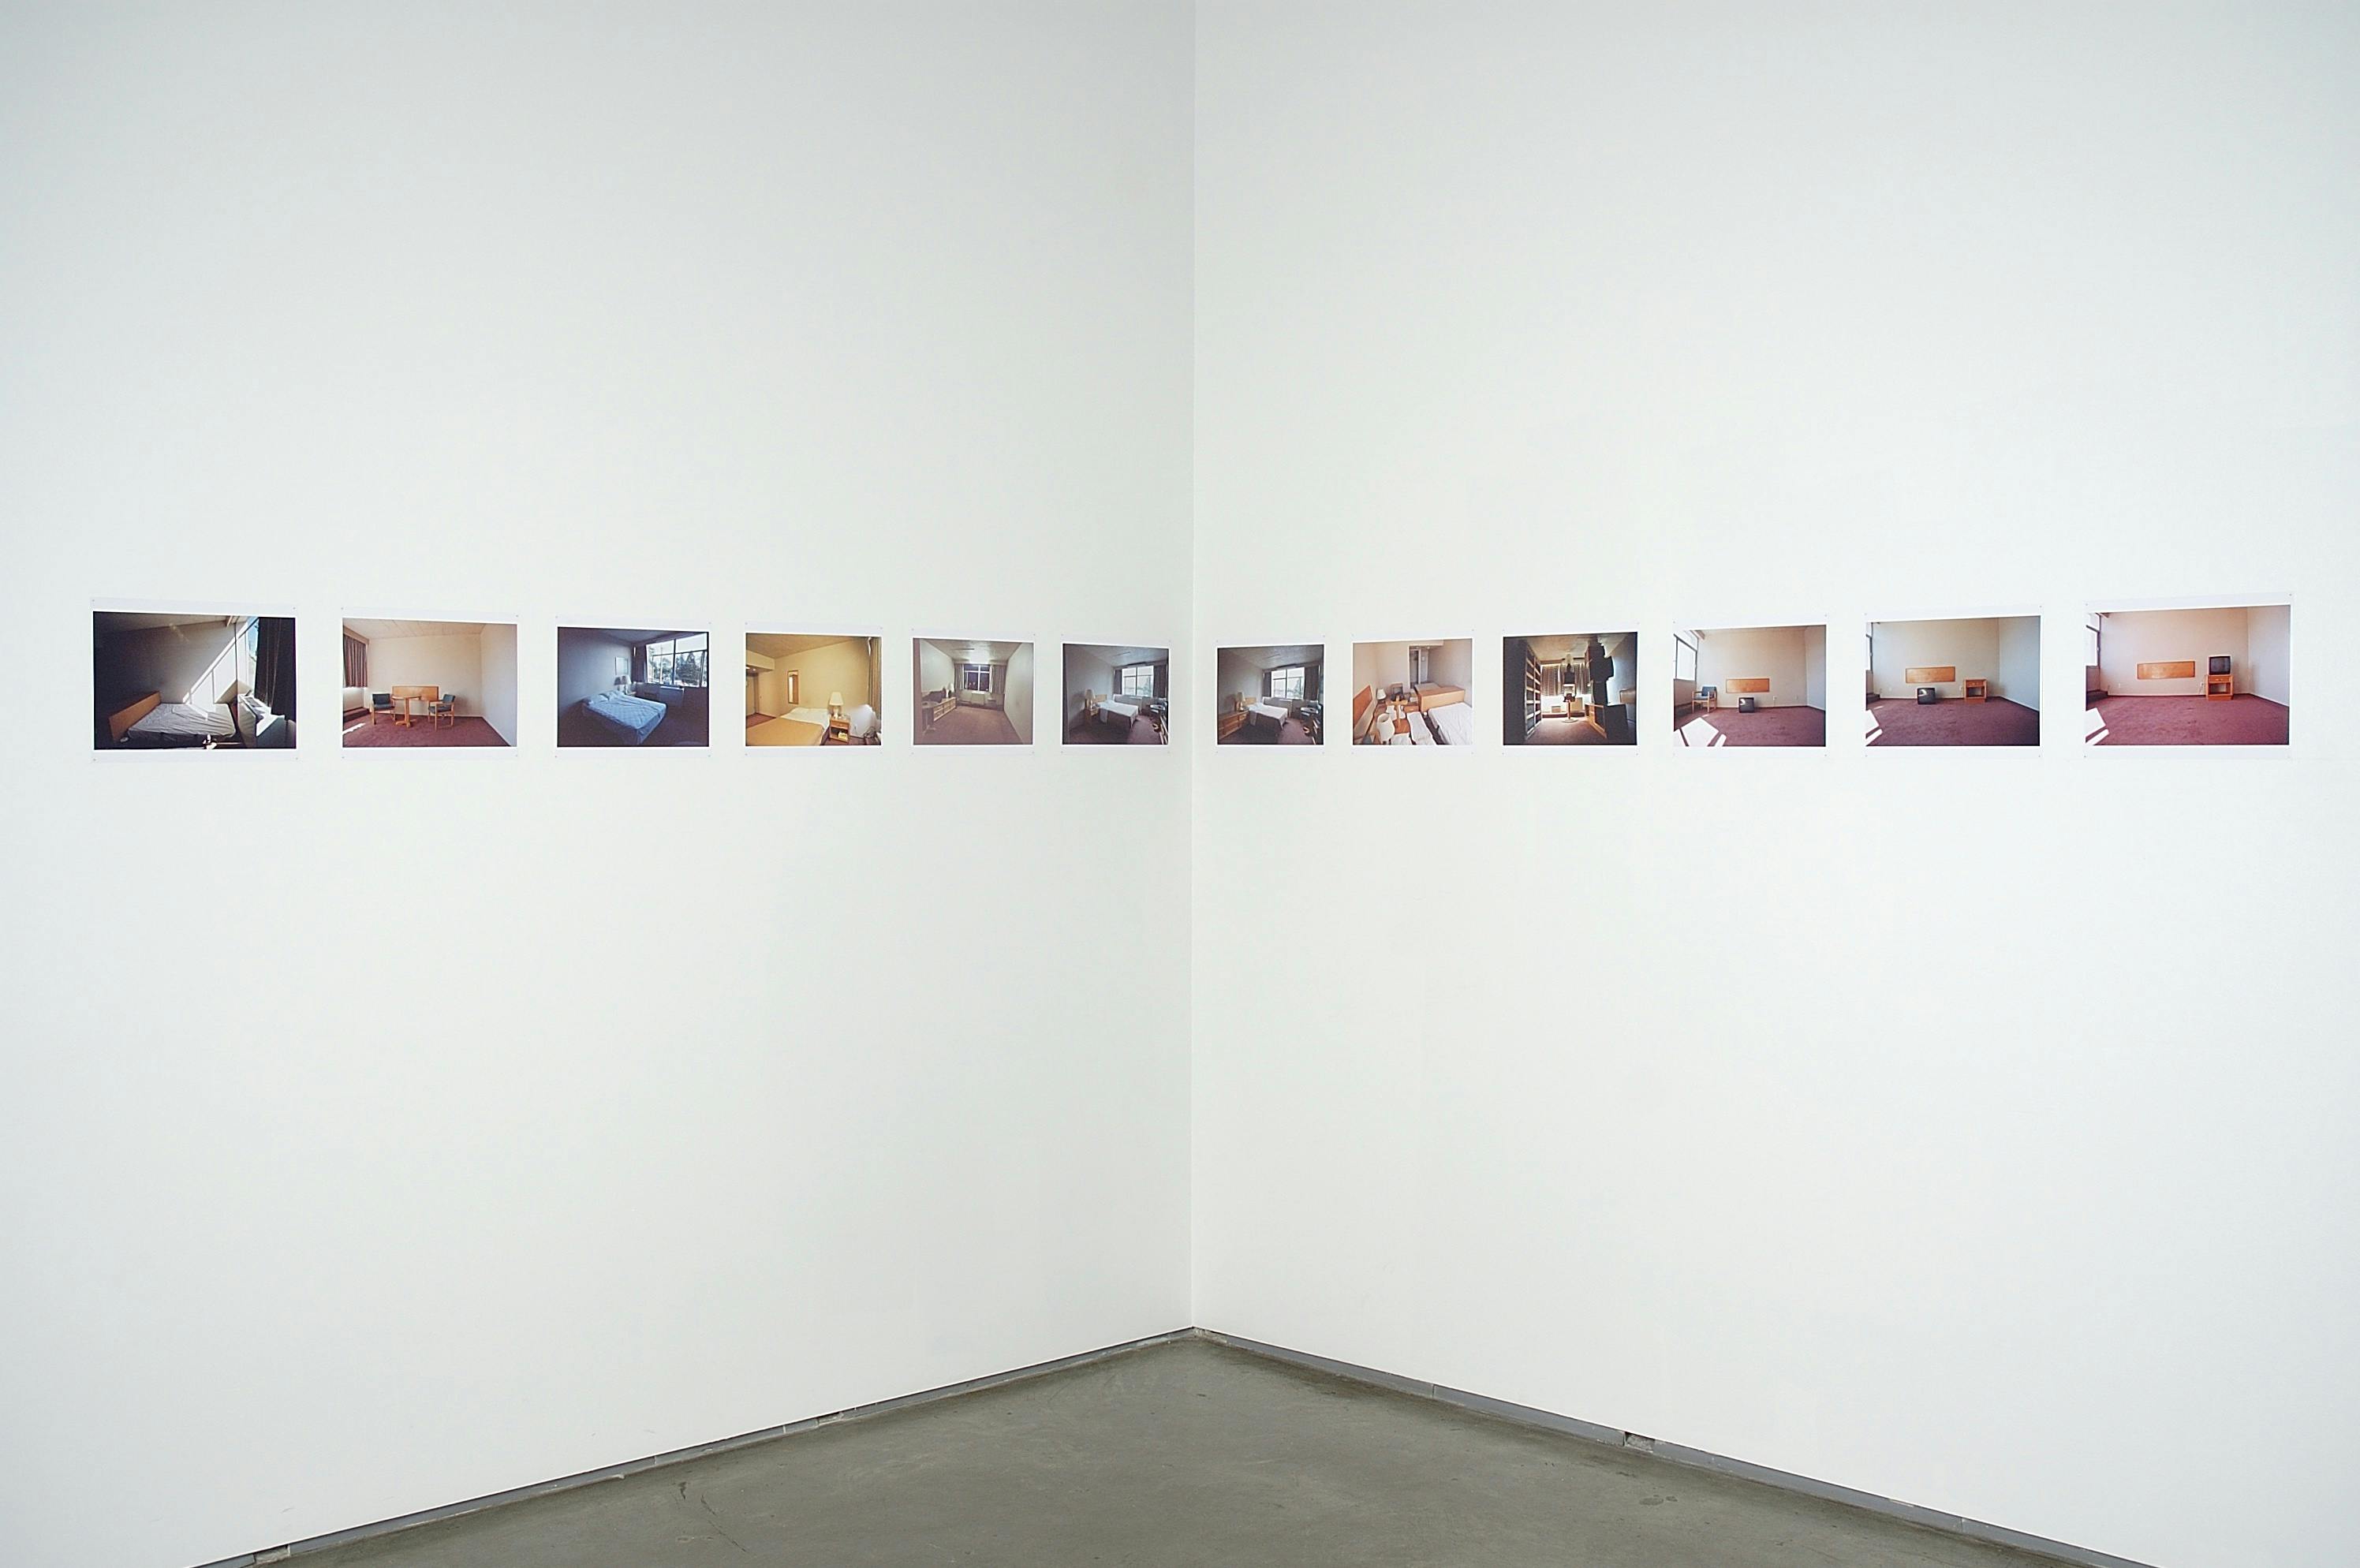 Twelve small, unframed photographs are hung in a line across the corner of two gallery walls. The photographs are of various interior, domestic-like spaces.